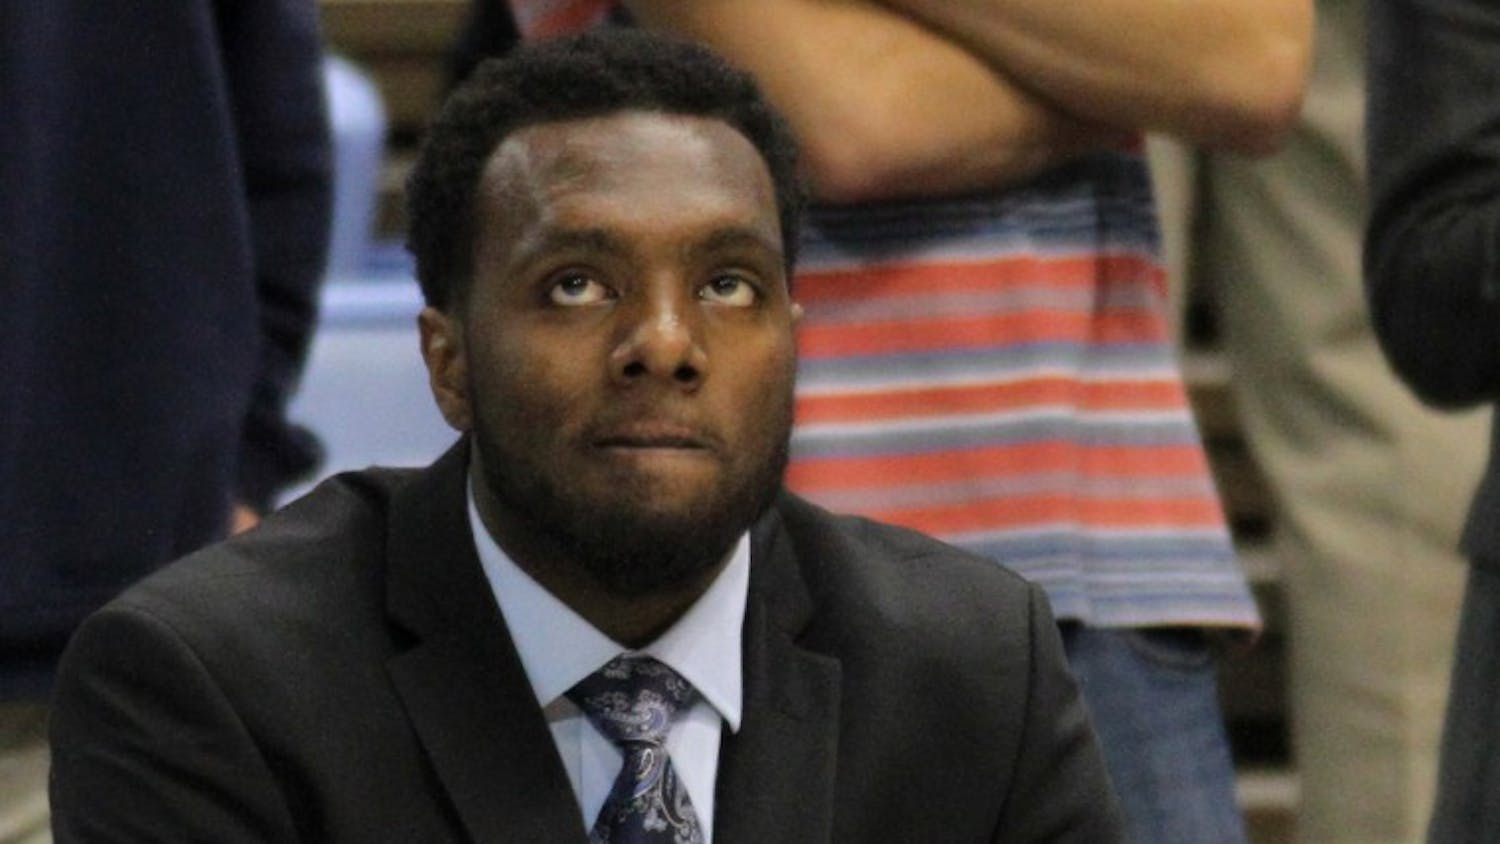 P.J. Hairston was a former guard for the UNC men's basketball team.